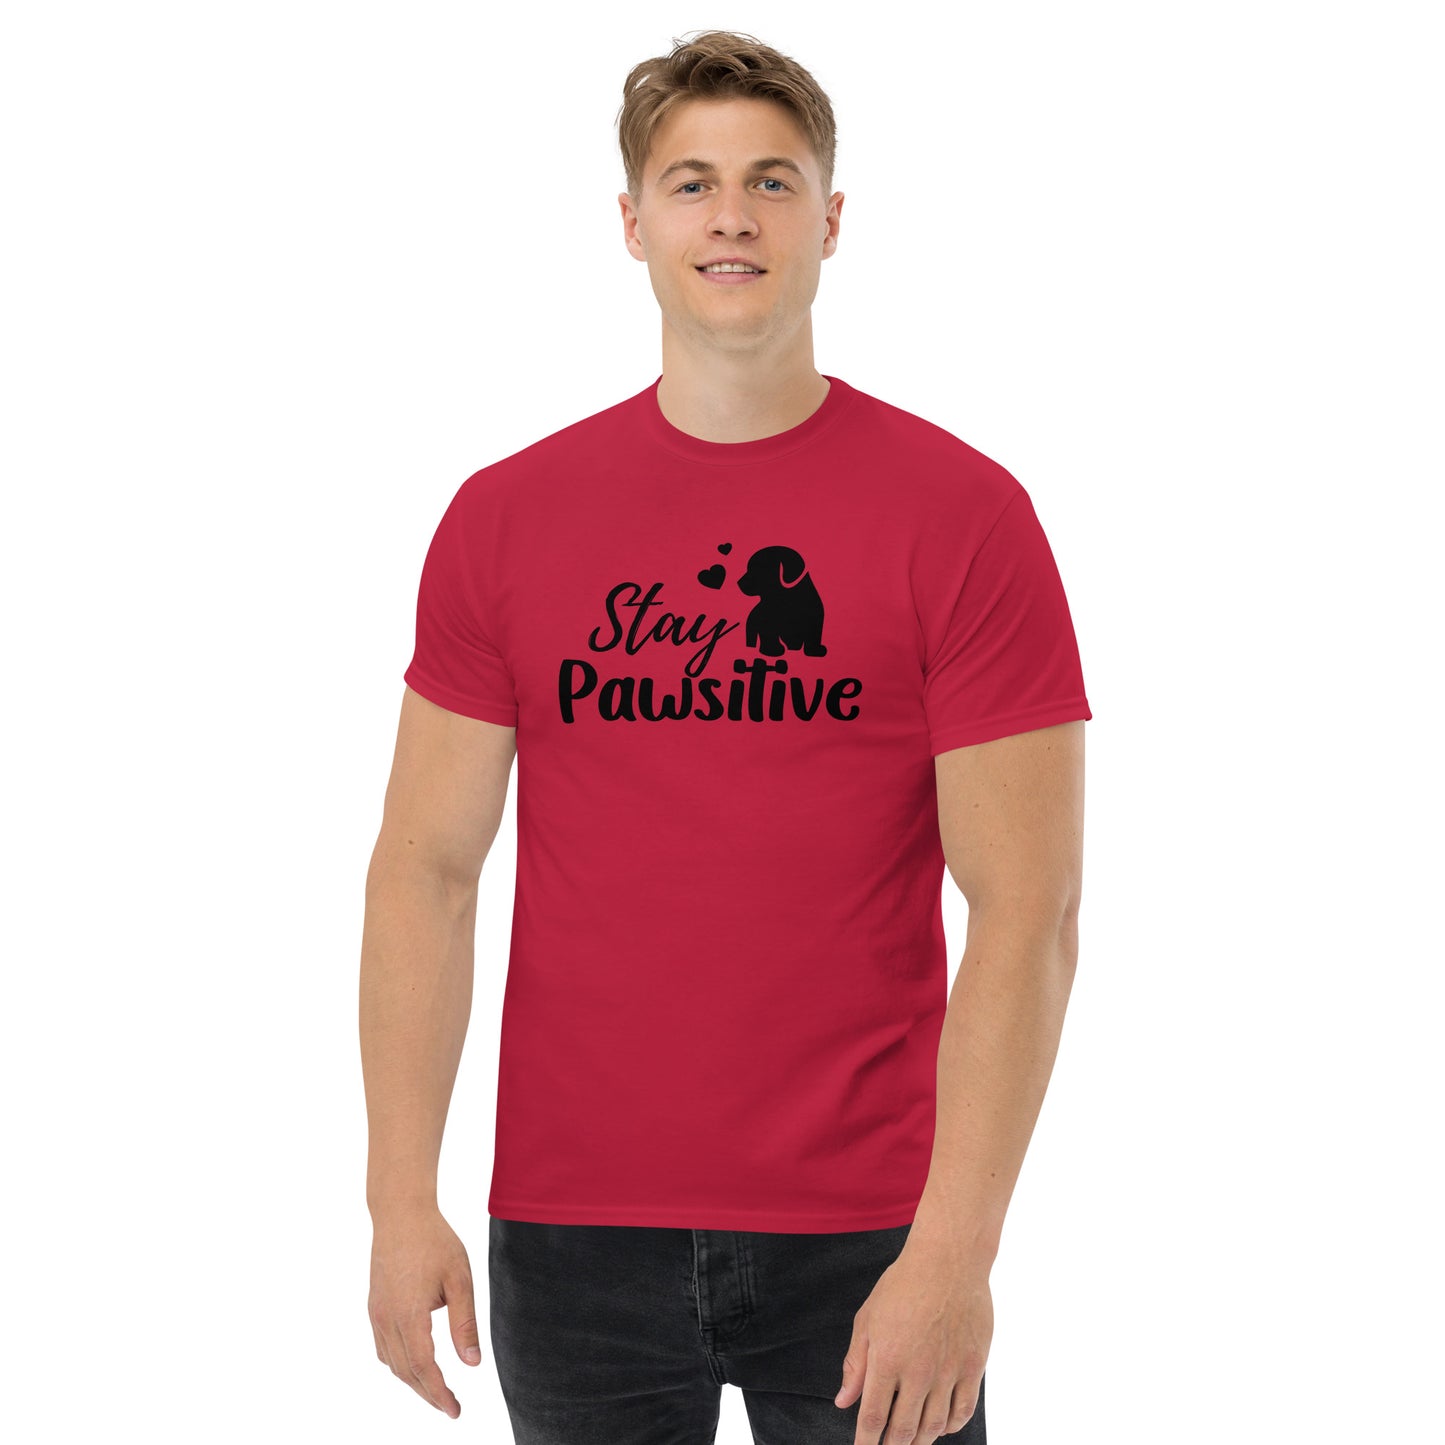 Spread Positivity in Style with Our Dog Lover T-Shirts - Shop Now!